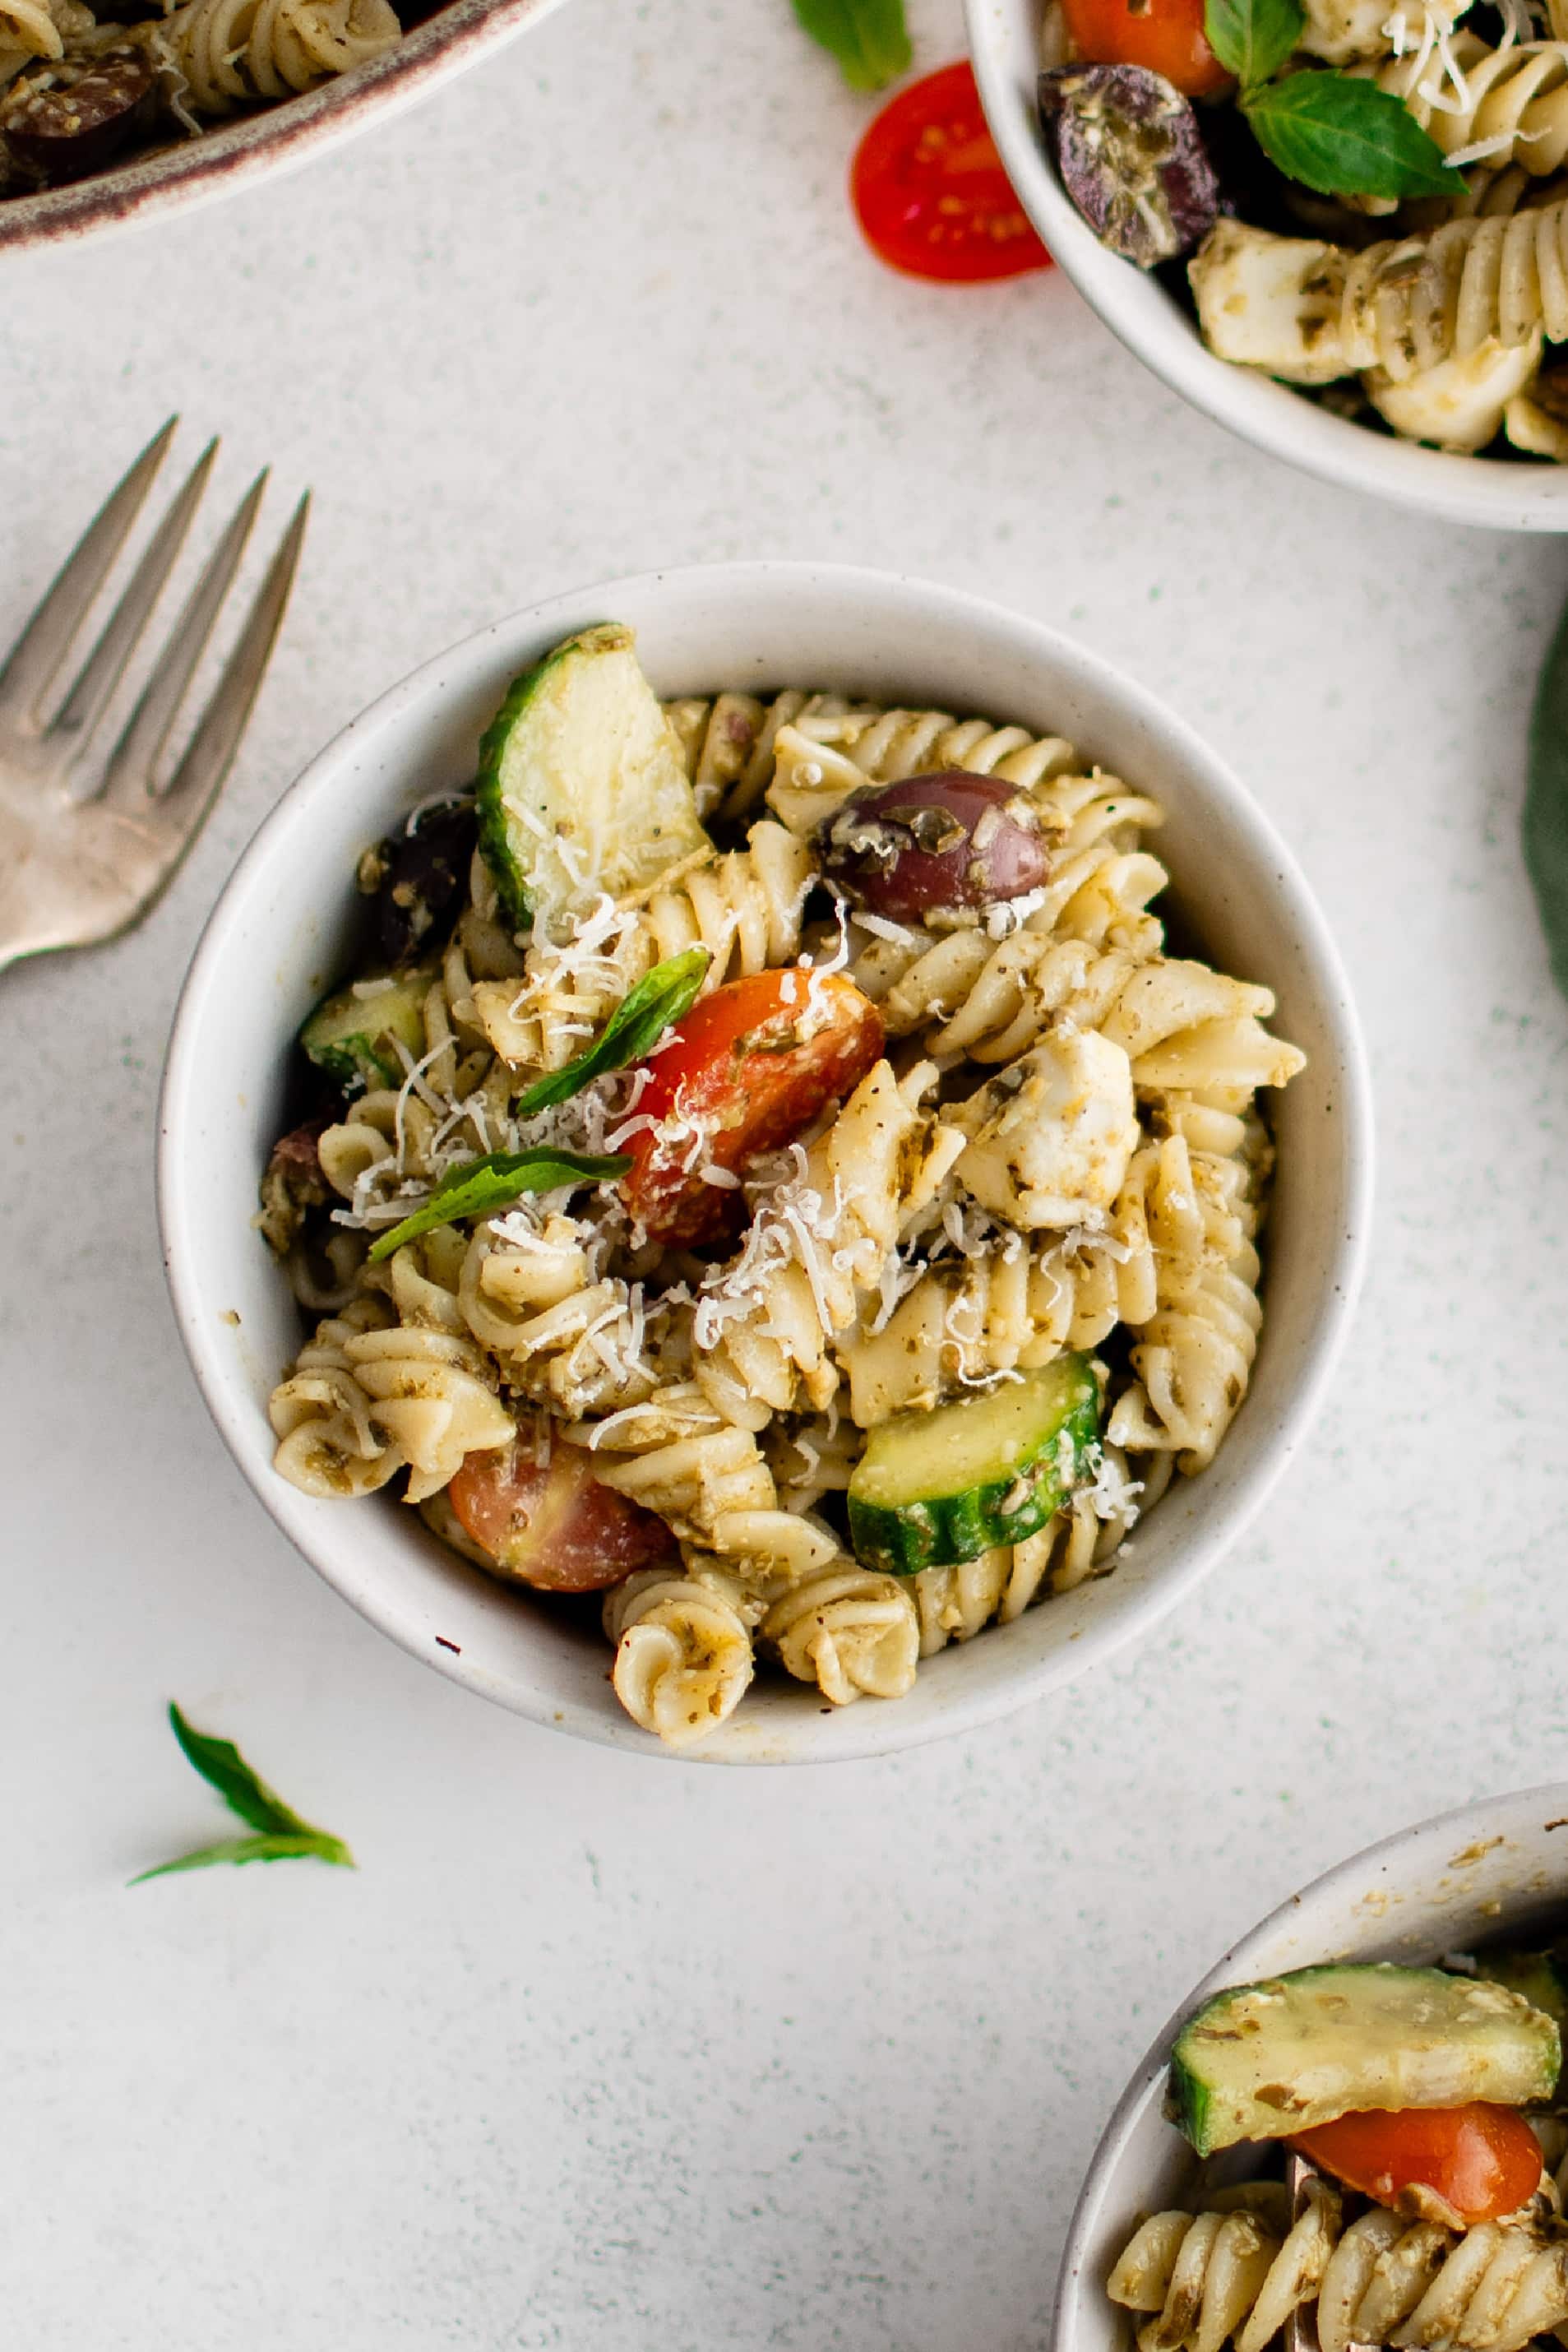 Small white bowl filled with an individual serving of cold pesto pasta salad made with rotini pasta, tomatoes, cucumber, mozzarella pearls, and kalamata olives.